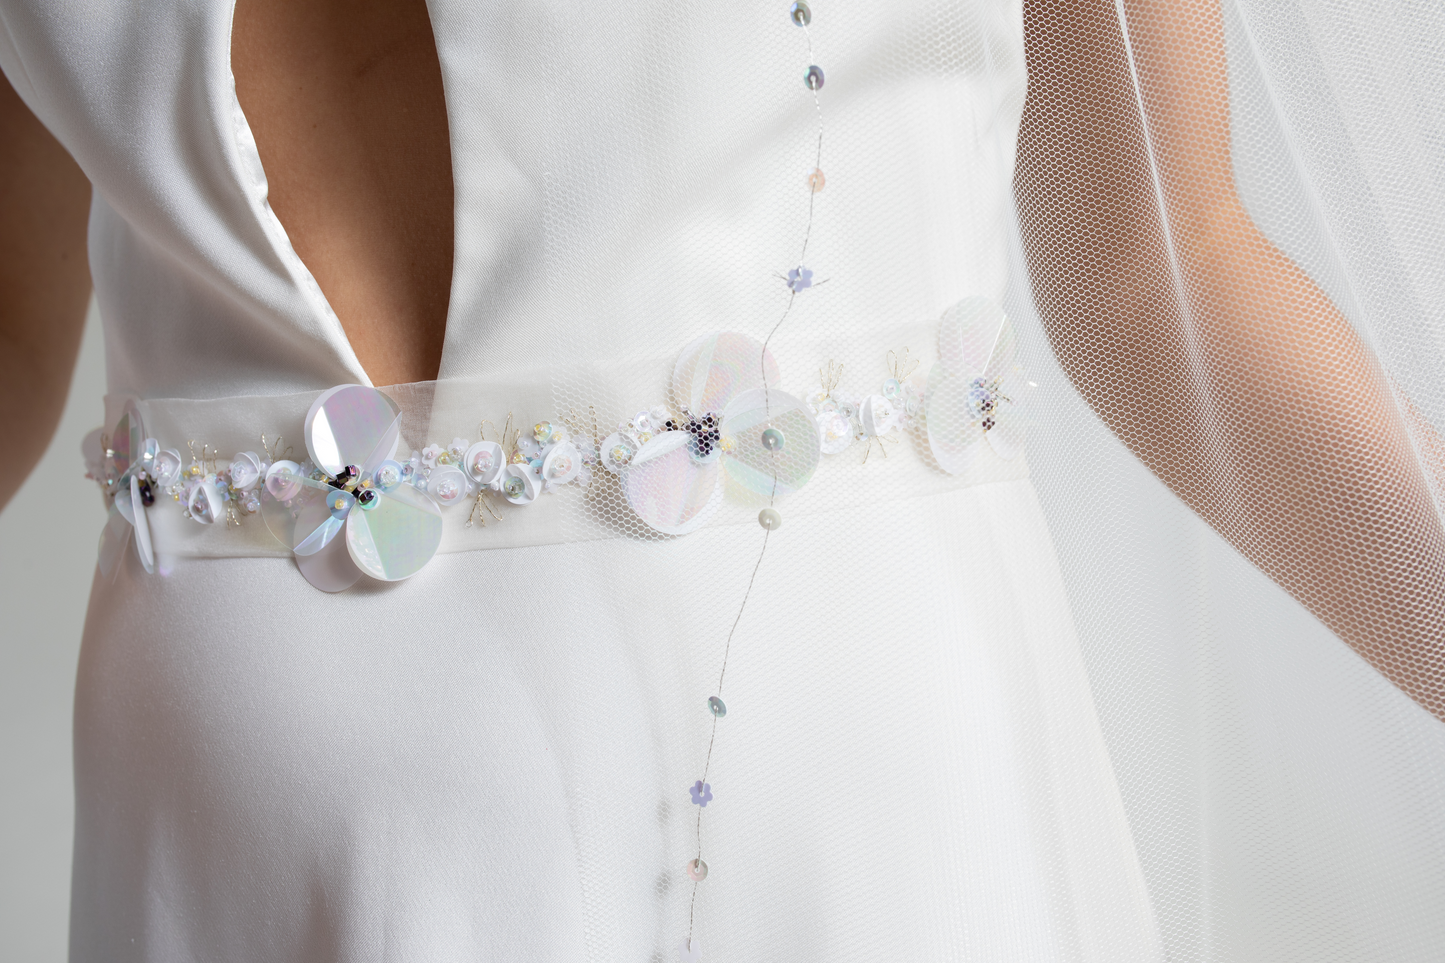 Hand-embroidered silk organza wedding belt decorated with hand-sewn sequins and beads in a floral design. This embellished bridal belt is part of a collection of luxury hand-made bridal accessories.